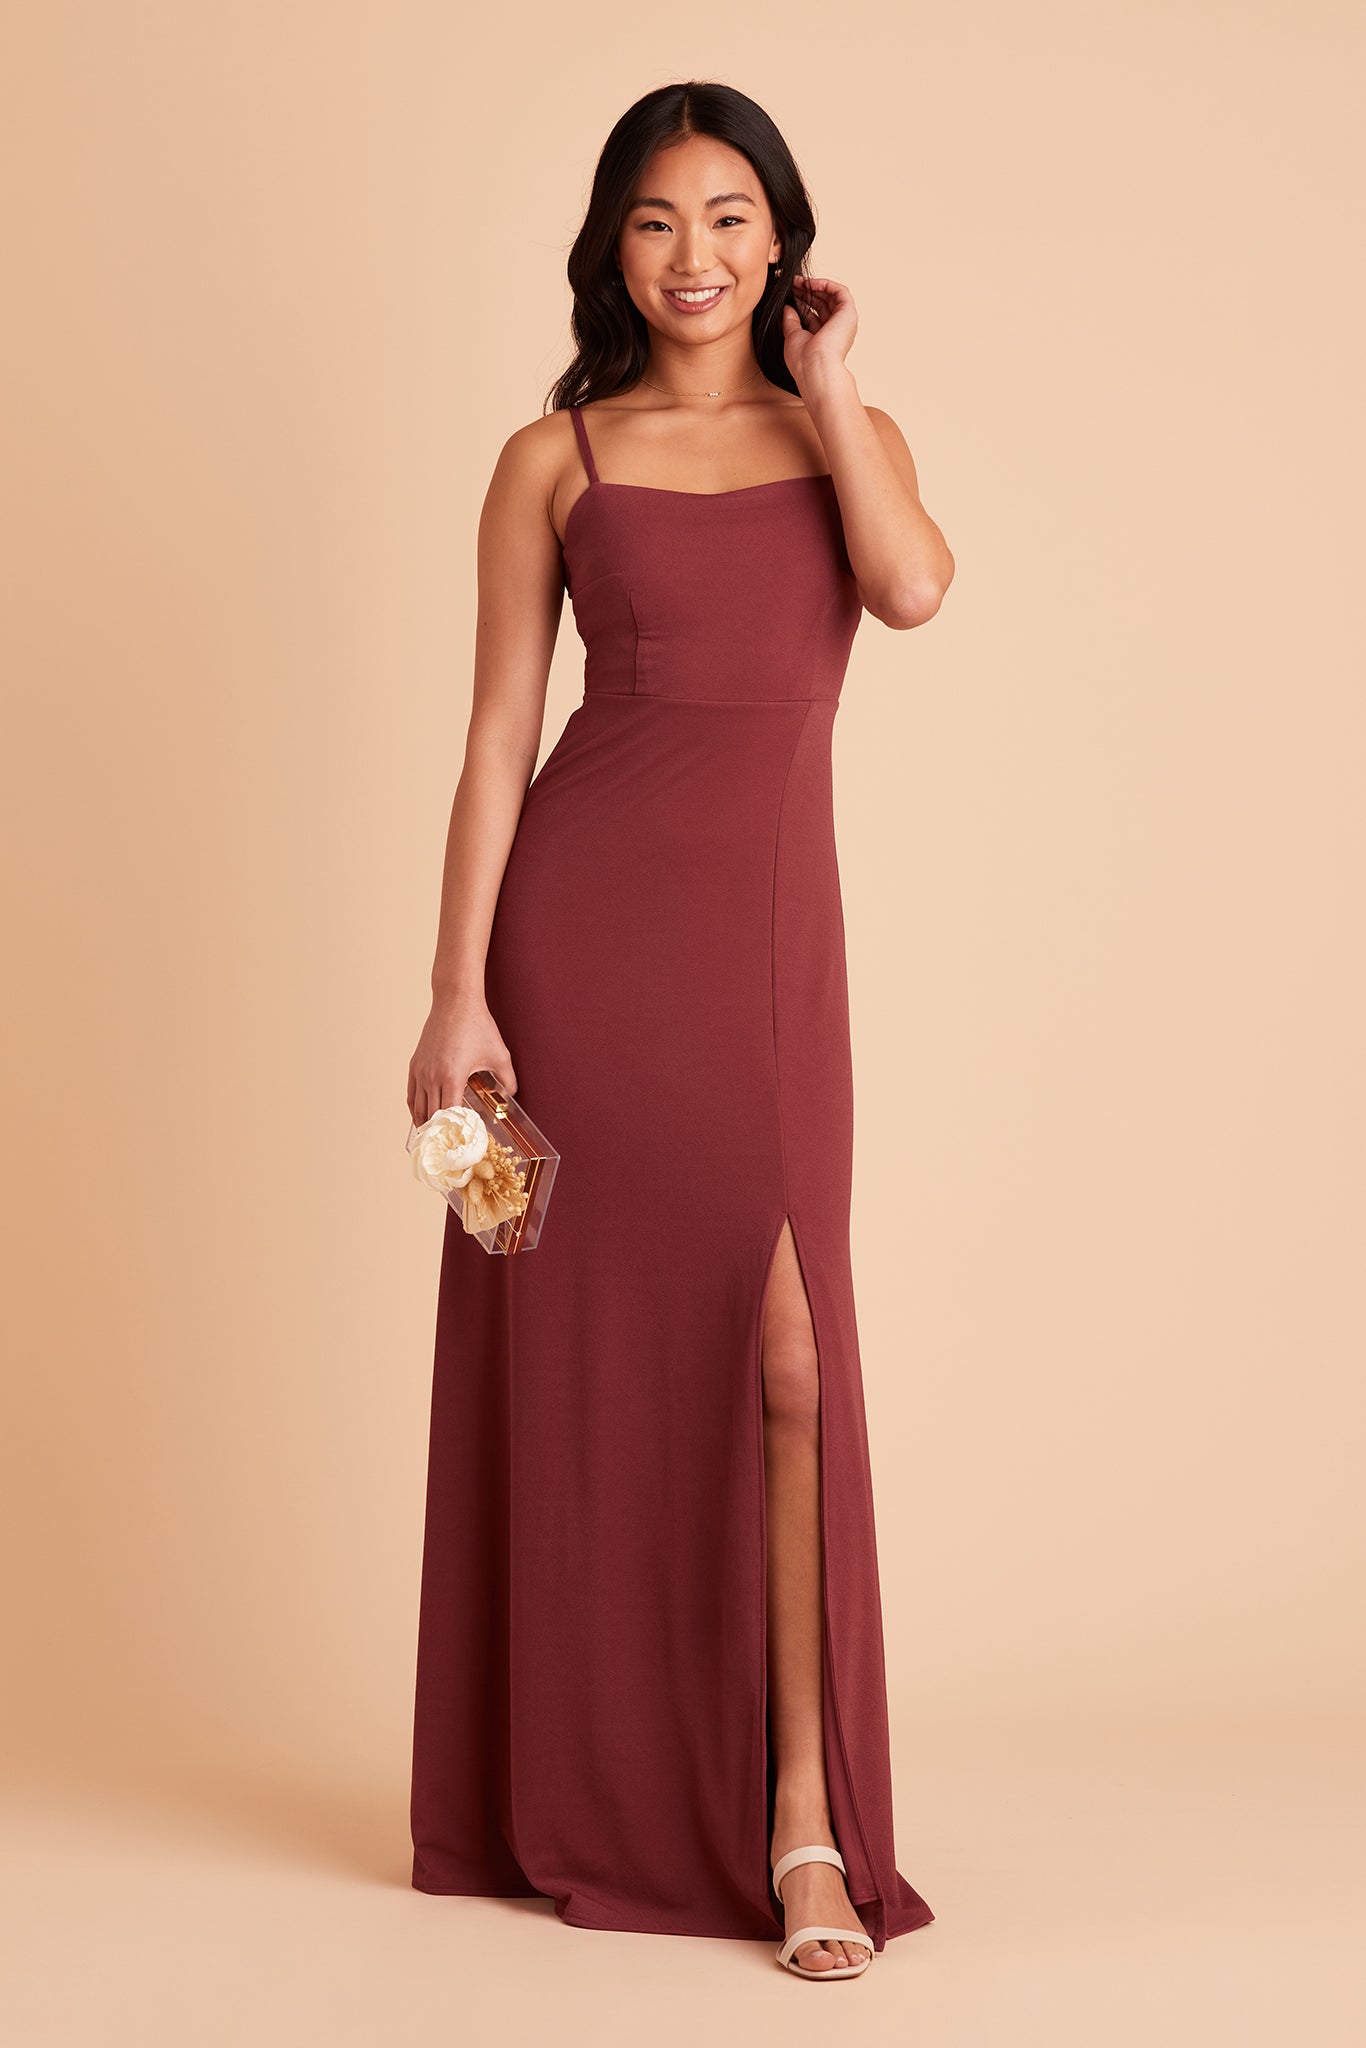 Benny bridesmaid dress in rosewood crepe by Birdy Grey, front view